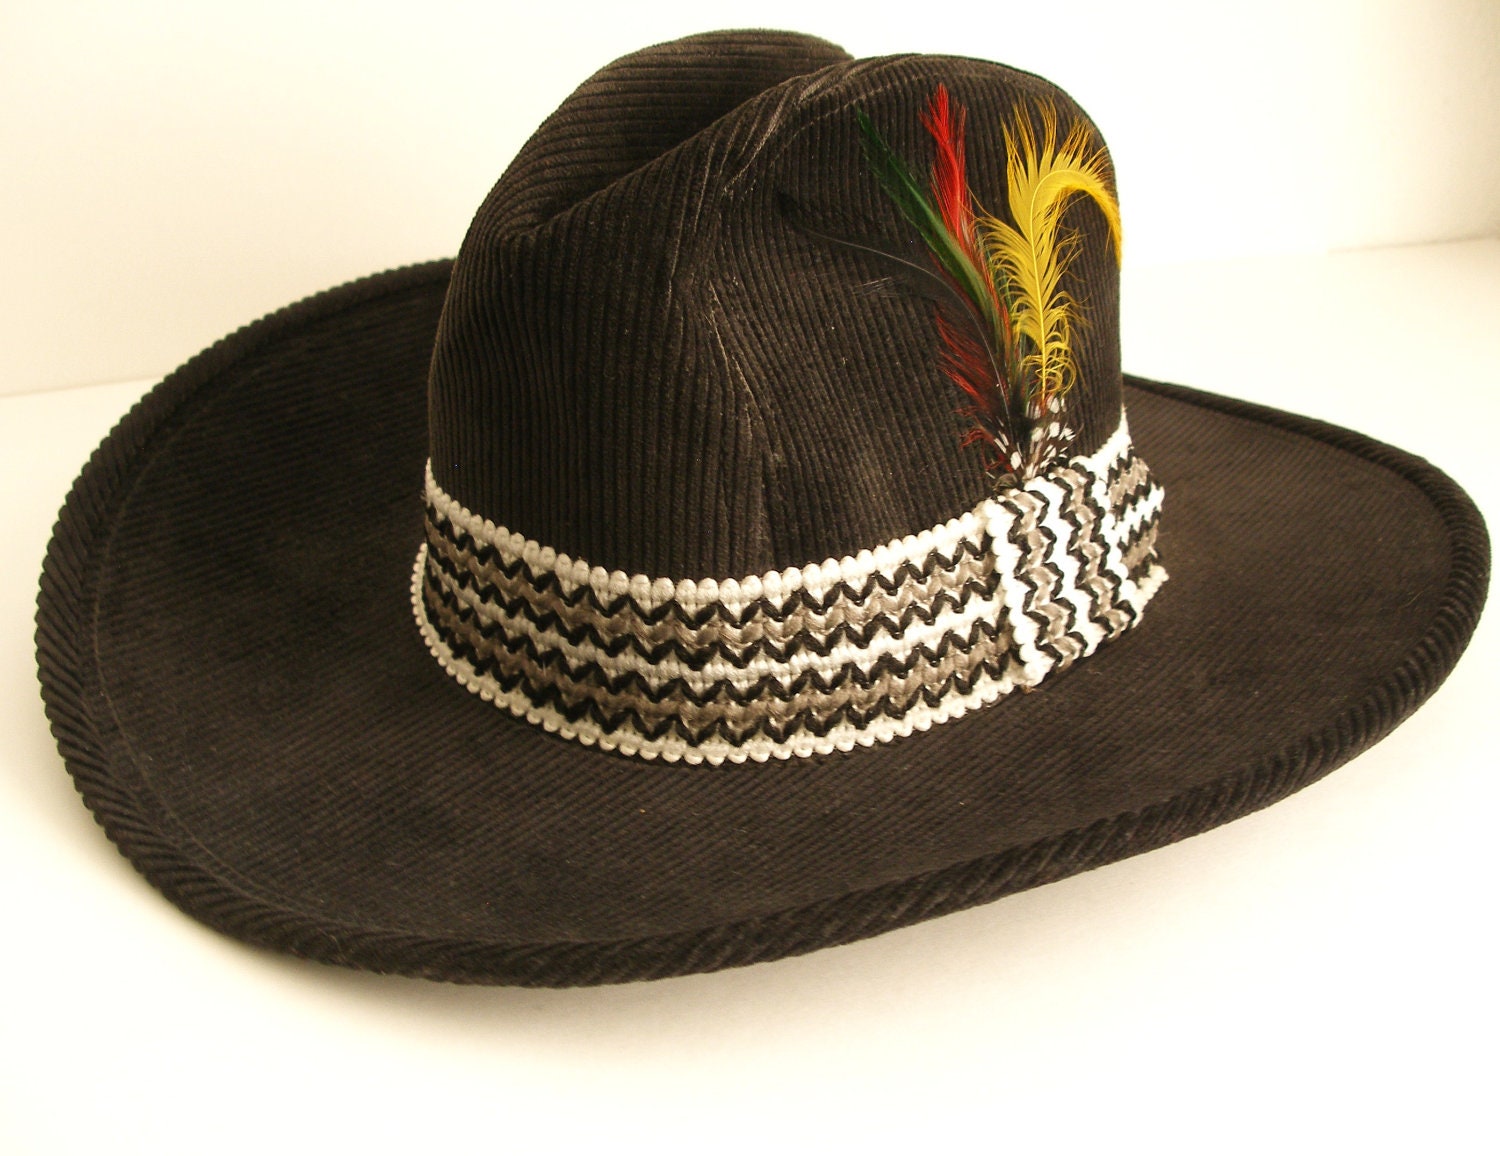 Black Corduroy Cowboy Hat with Gray and White Woven Hatband & Feathers - Gifts For Him - Under 50